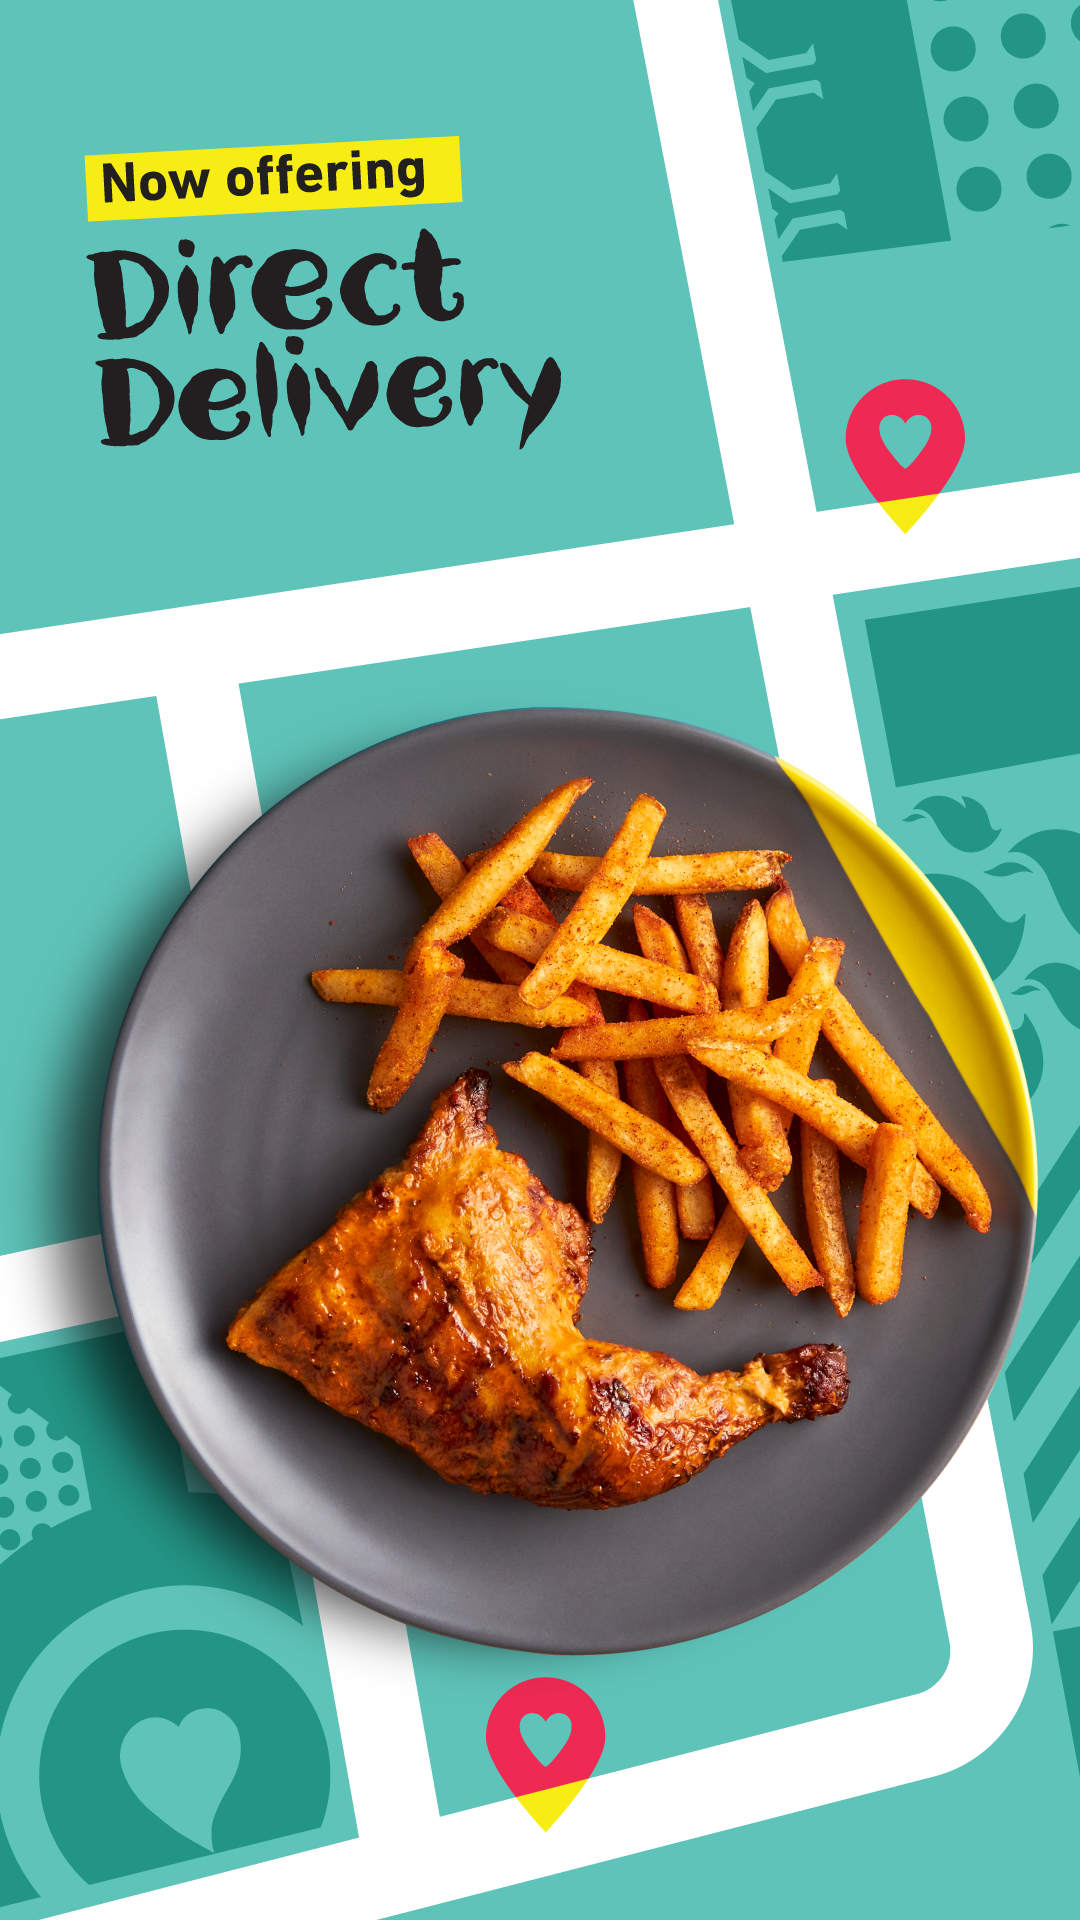 Nando's Always Delivers Cover Images